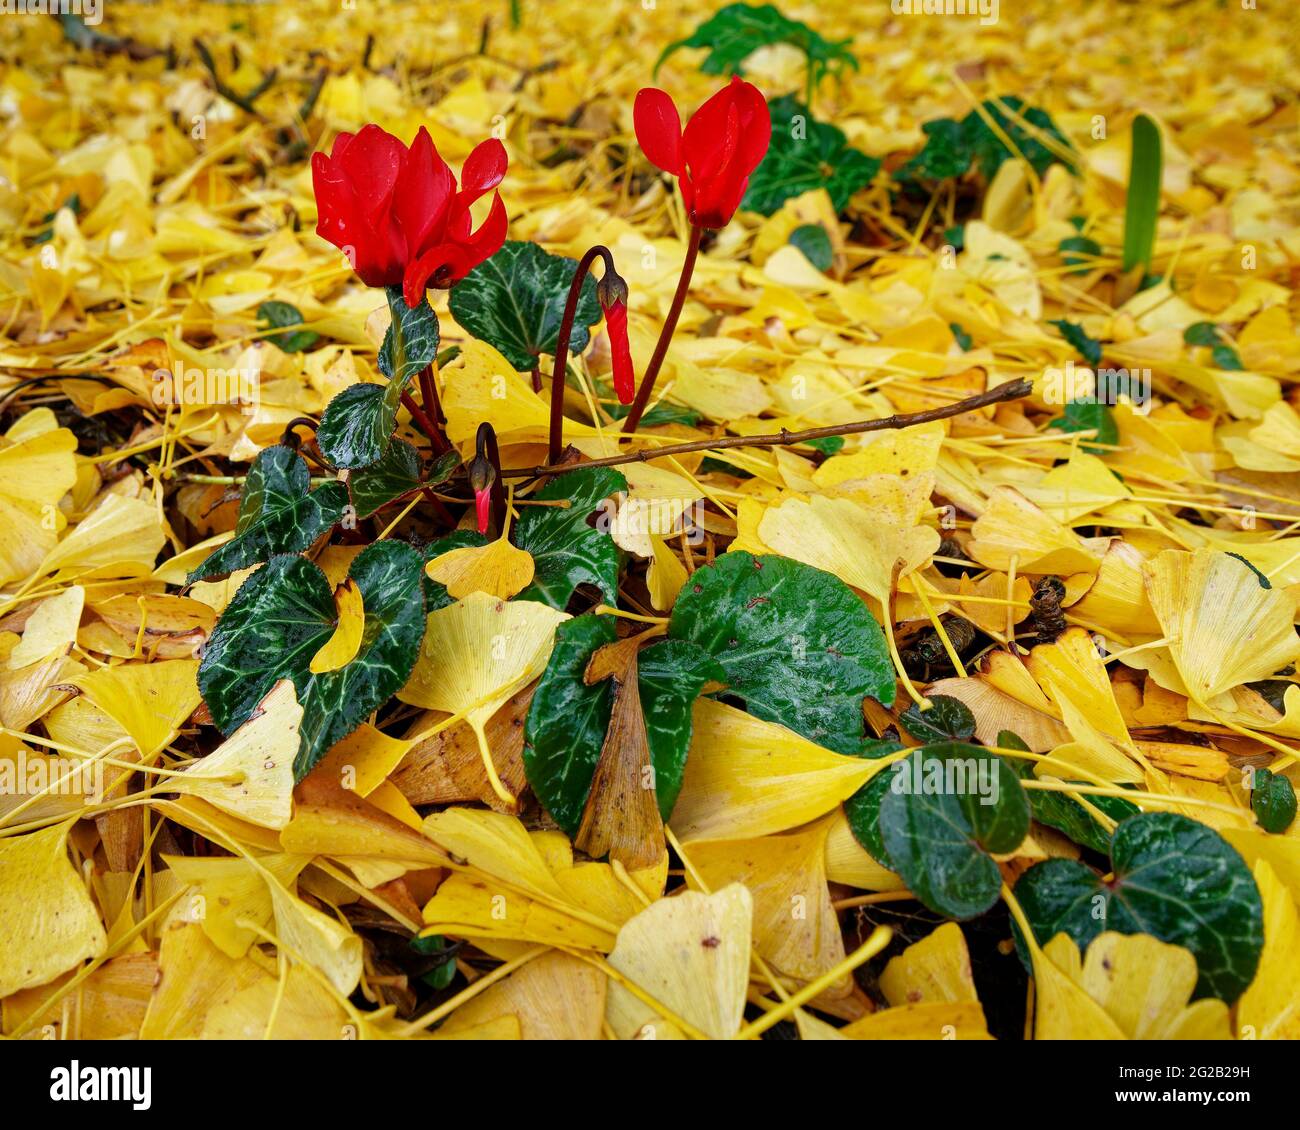 Red cyclamen growing up through a bed of dead ginkgo tree leaves in a park. Stock Photo